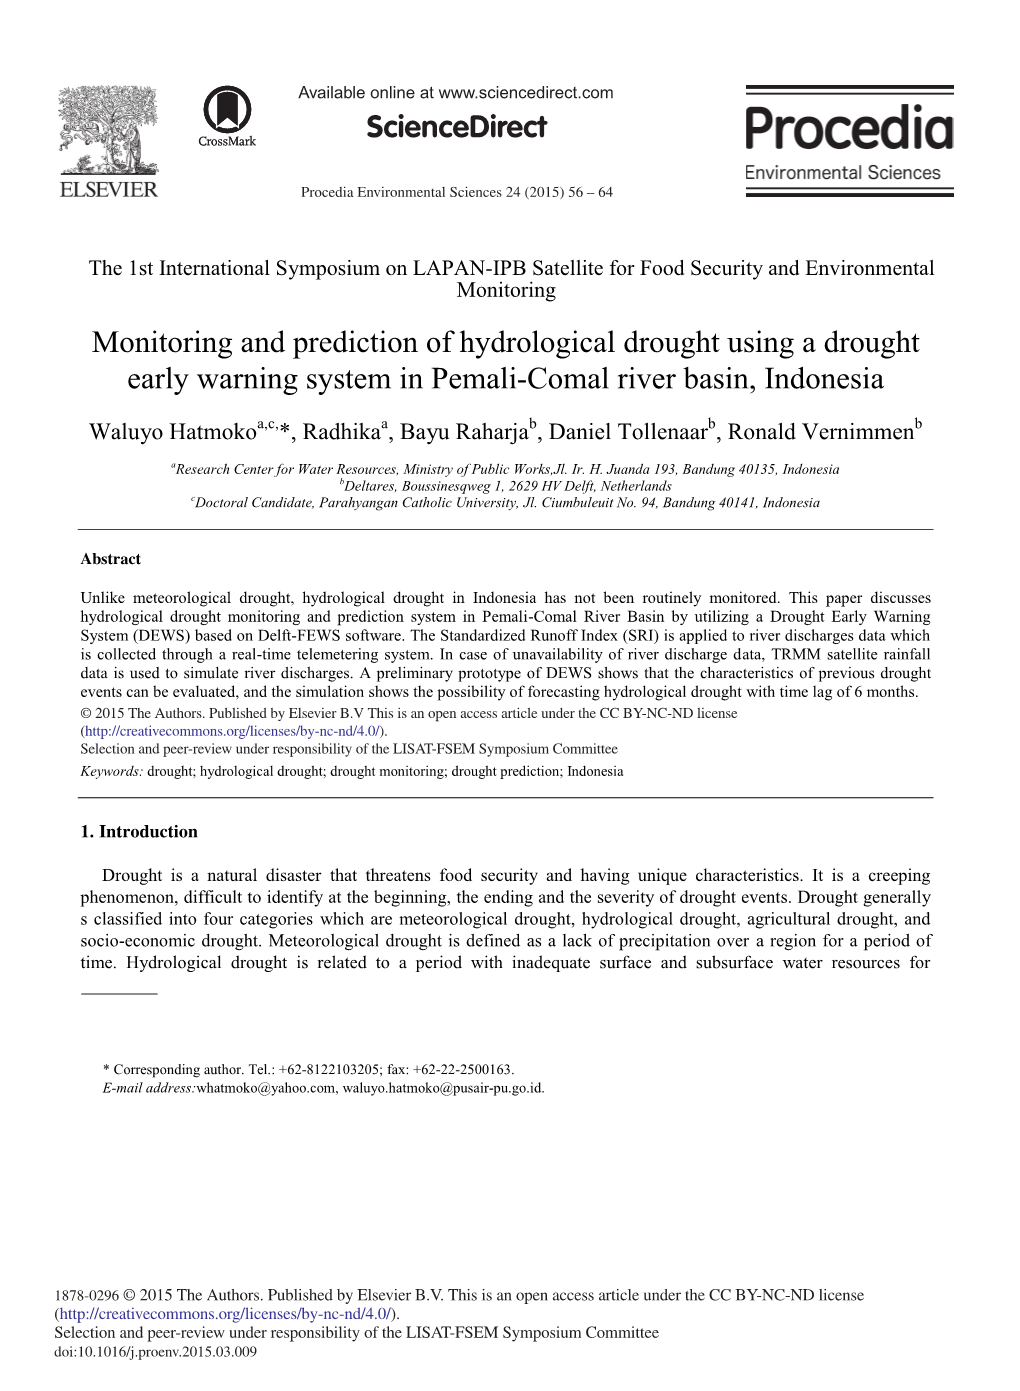 Monitoring and Prediction of Hydrological Drought Using a Drought Early Warning System in Pemali-Comal River Basin, Indonesia